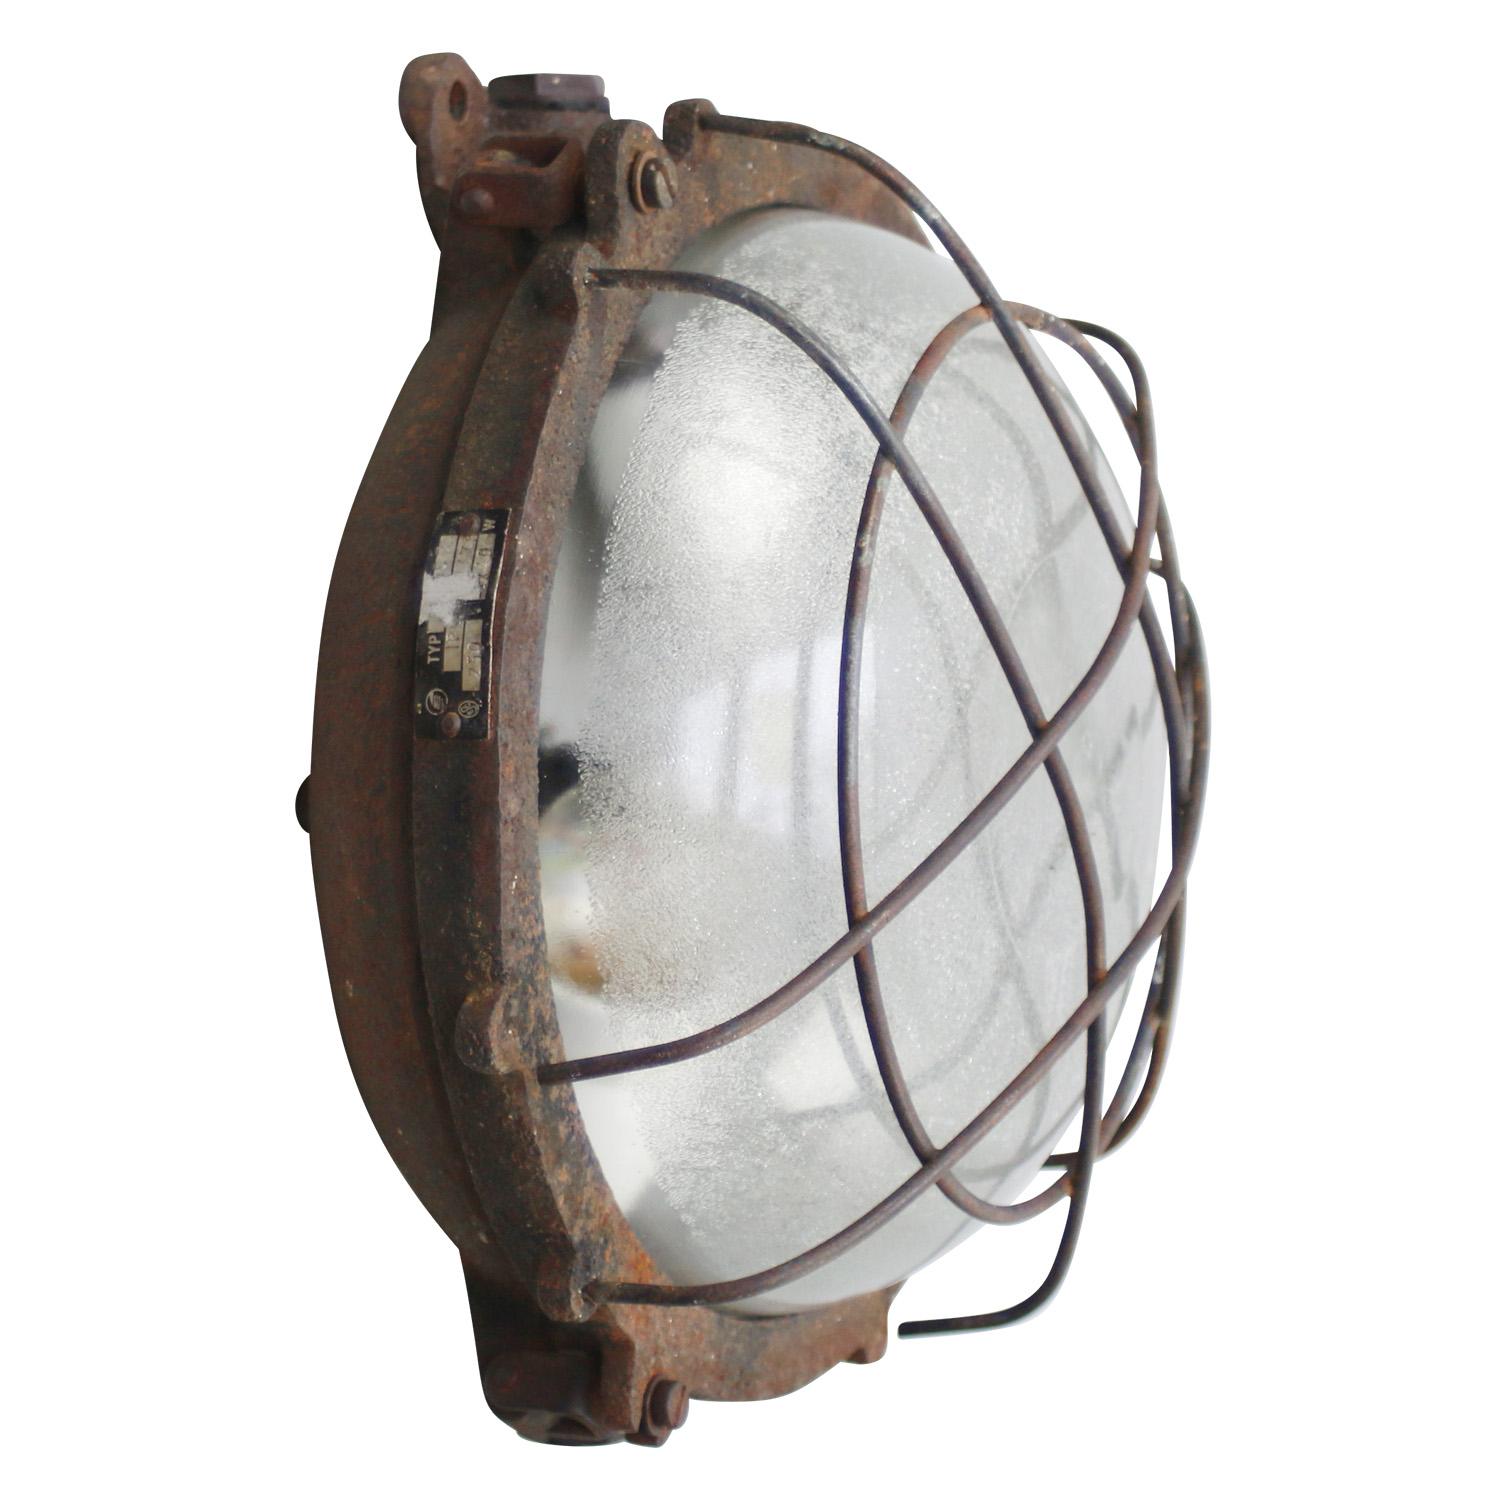 Industrial scone, wall and ceiling light, flush mount.
Cast iron with frosted glass

2x E26 / E27

Weight: 4.50 kg / 9.9 lb

Priced per individual item. All lamps have been made suitable by international standards for incandescent light bulbs,